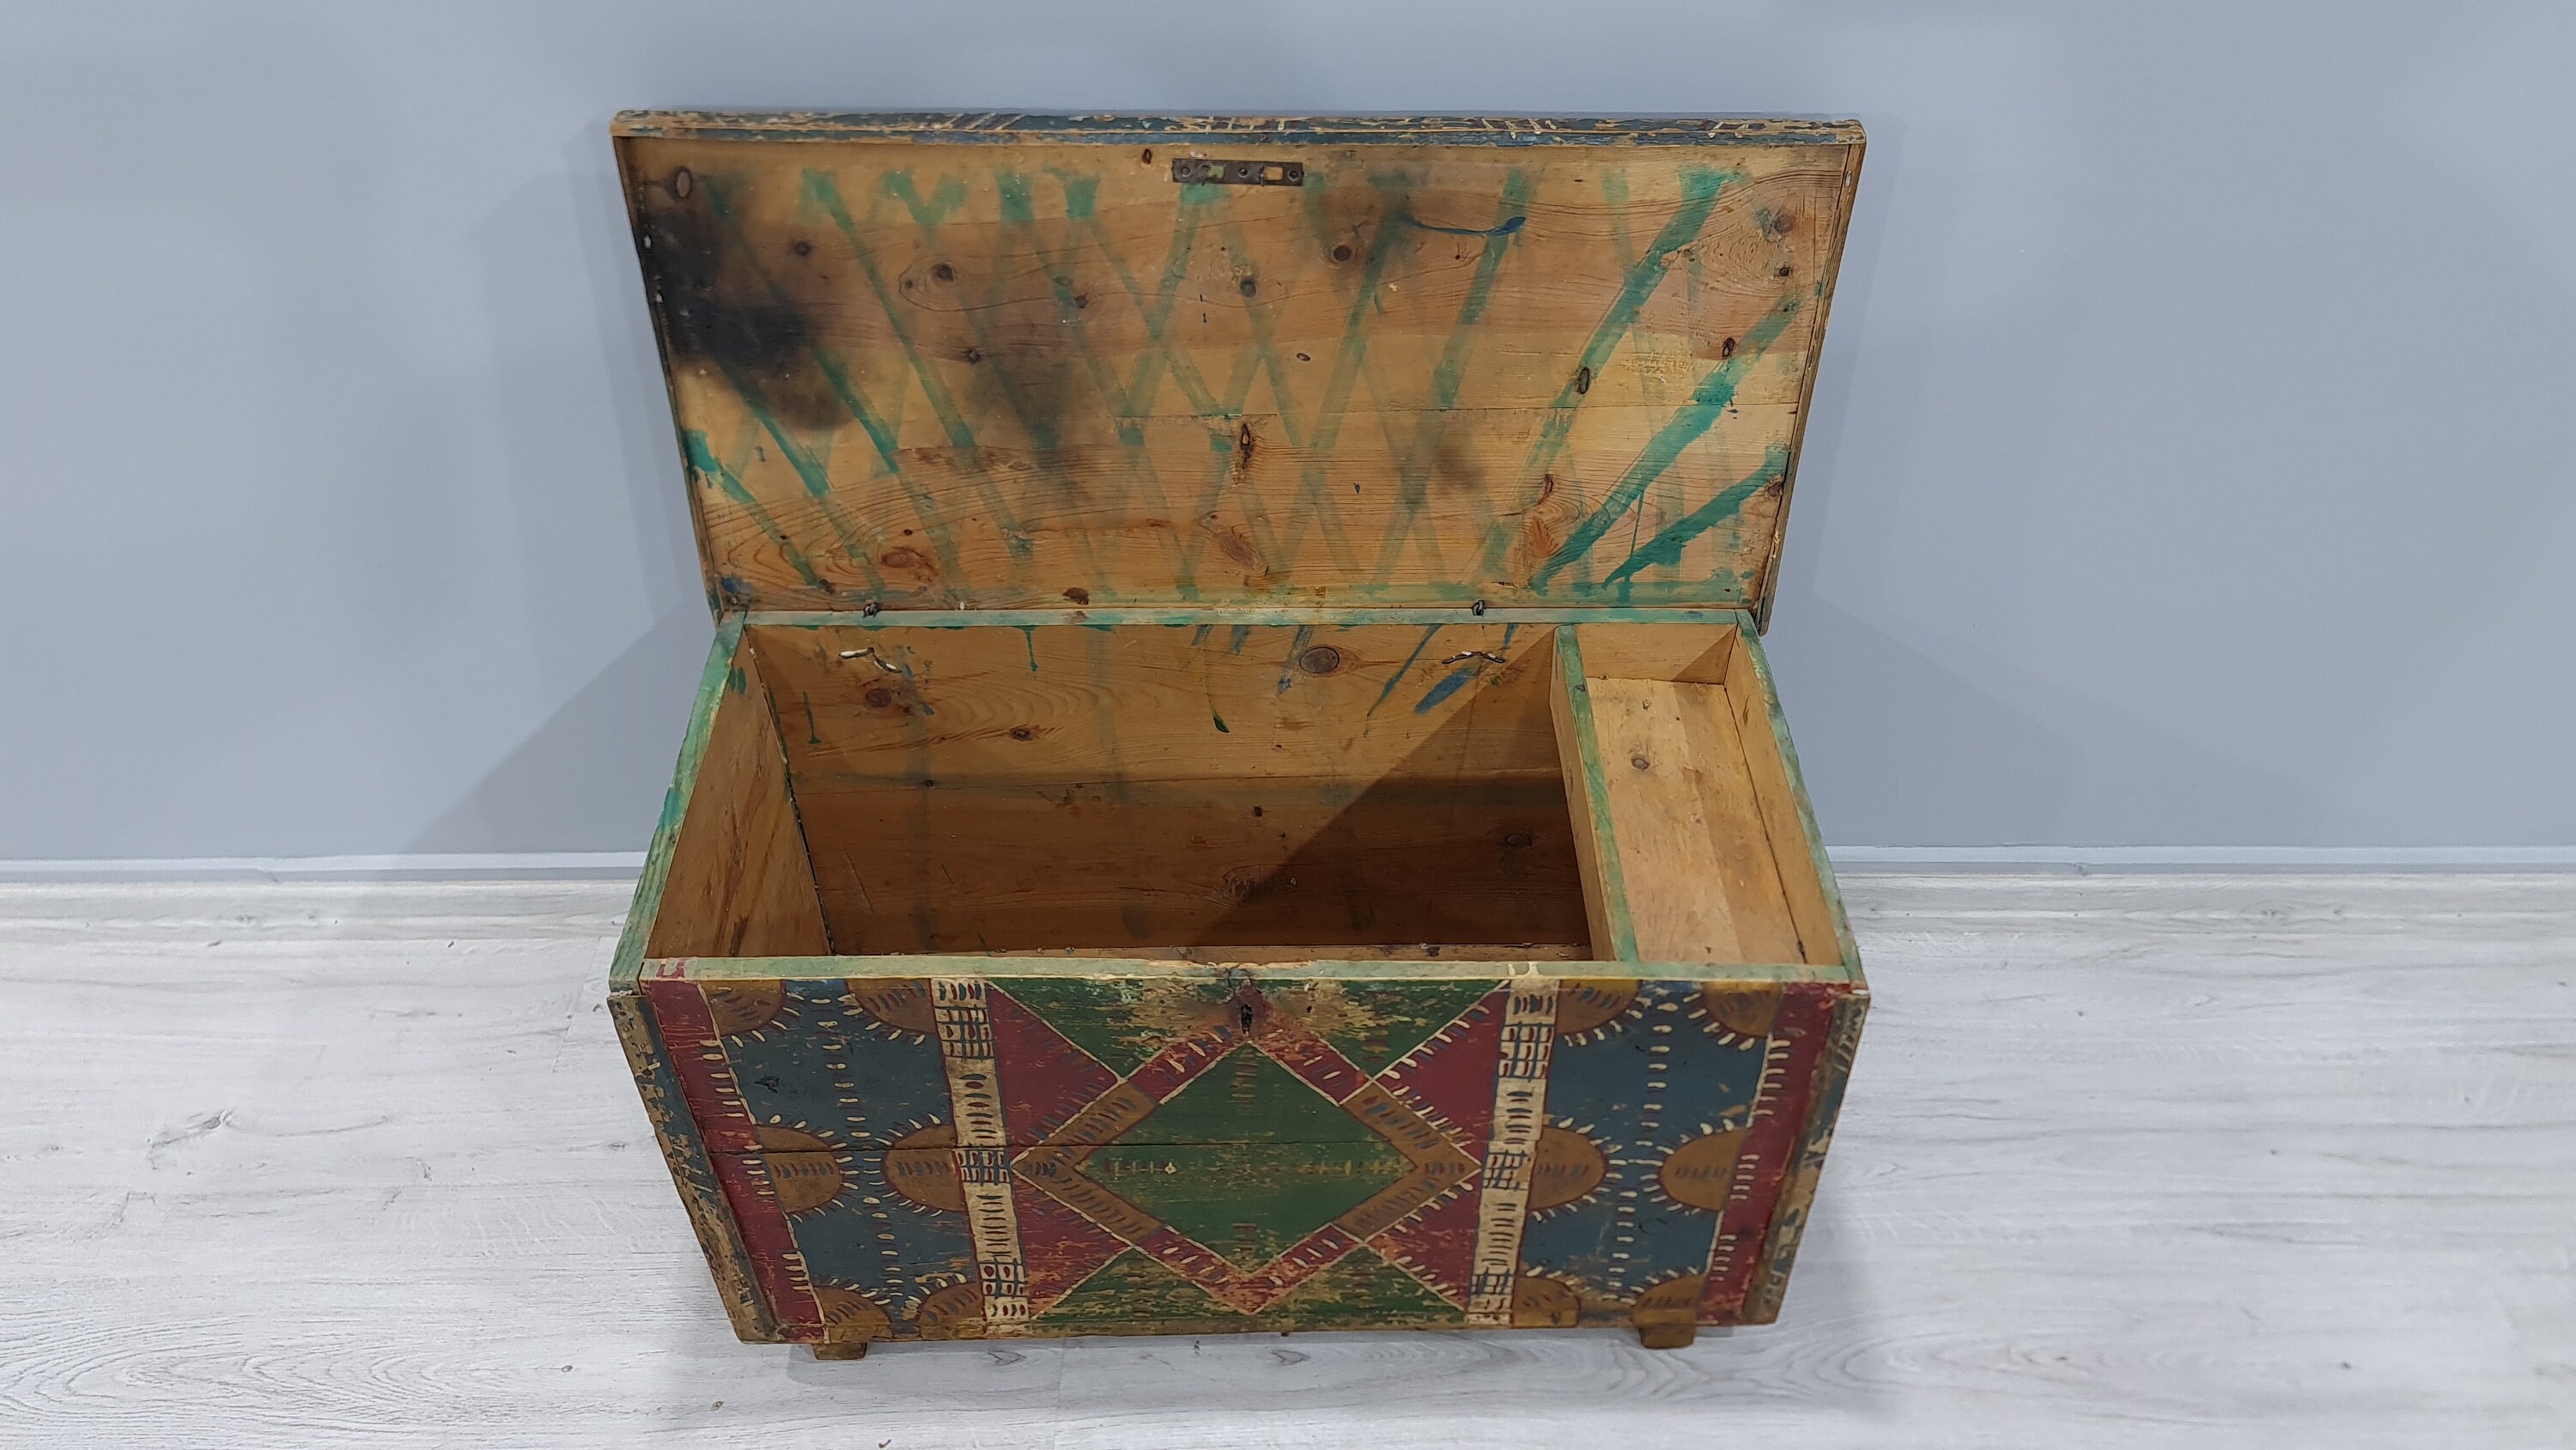 Wooden Chest at 1stDibs  wooden chests, wood chest, chest wooden